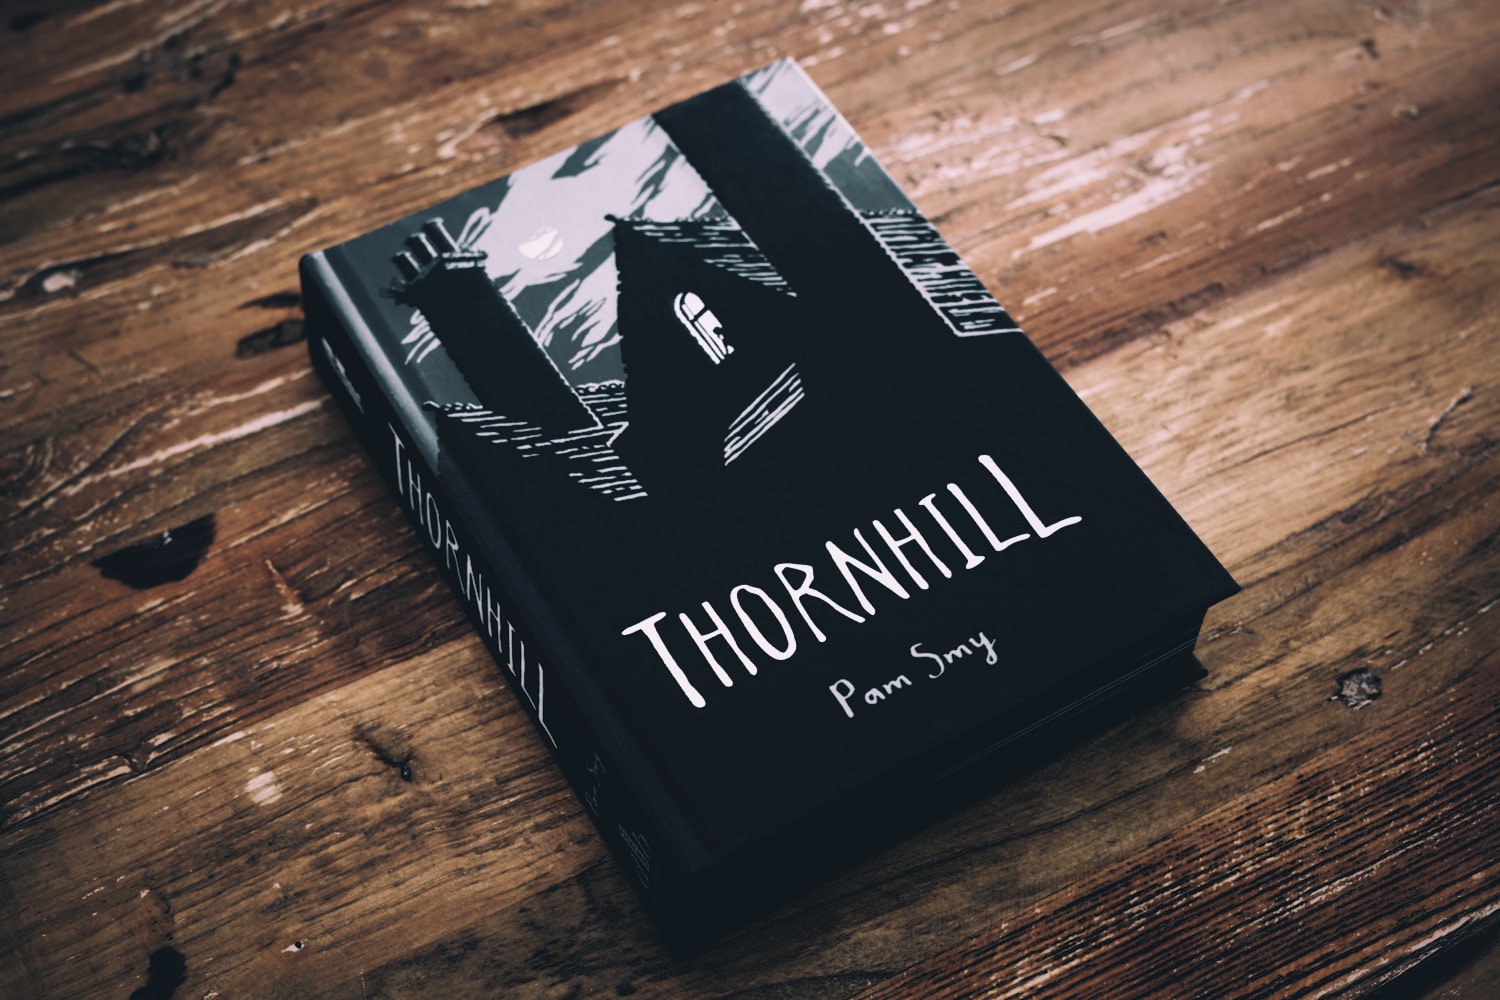 A pretty thick book, Thornhill by Pam Smy, lays on a wooden table. The cover is illustrated in black and white. The silhouette of a house with a prominent chimney on a moonlit night. A person, maybe a woman, looks out from a lit window. The title is handwritten in all caps.